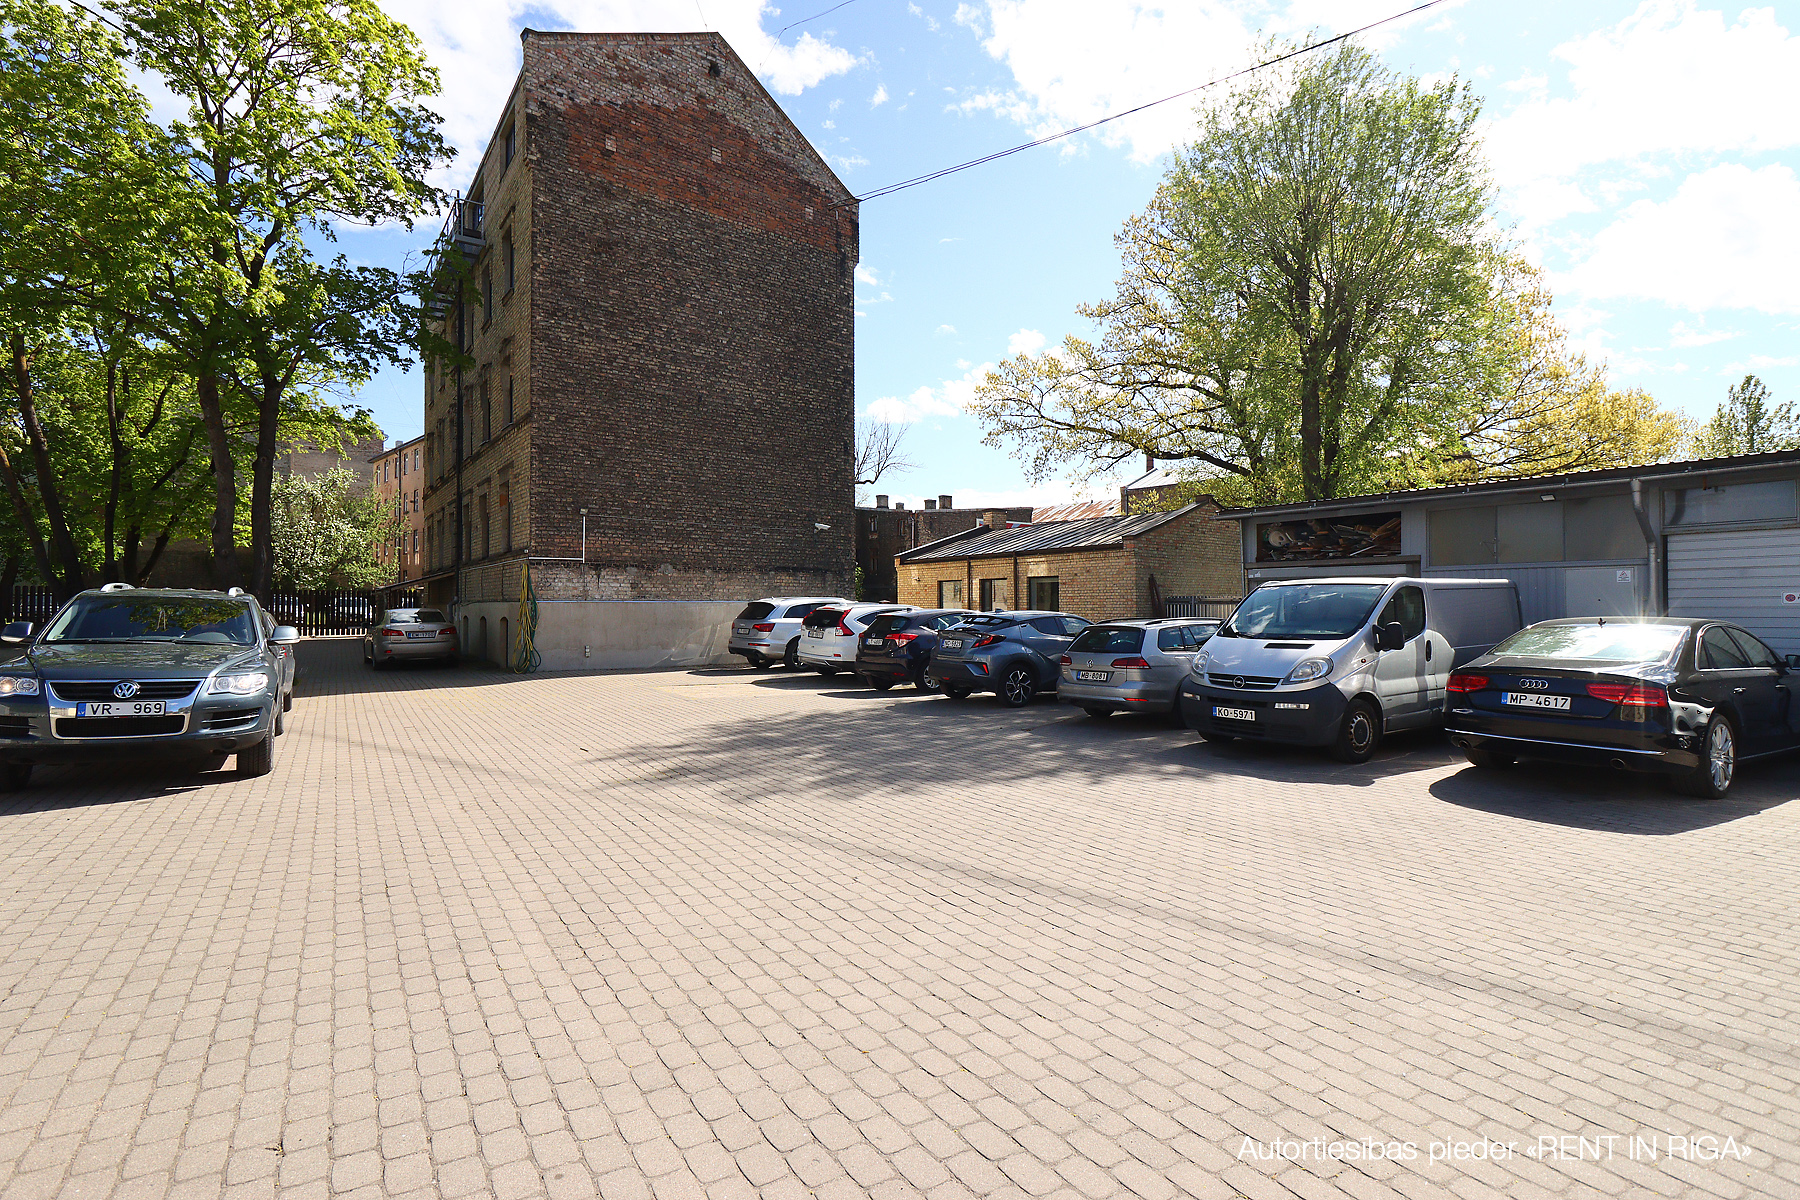 Office for rent, Valmieras street - Image 1